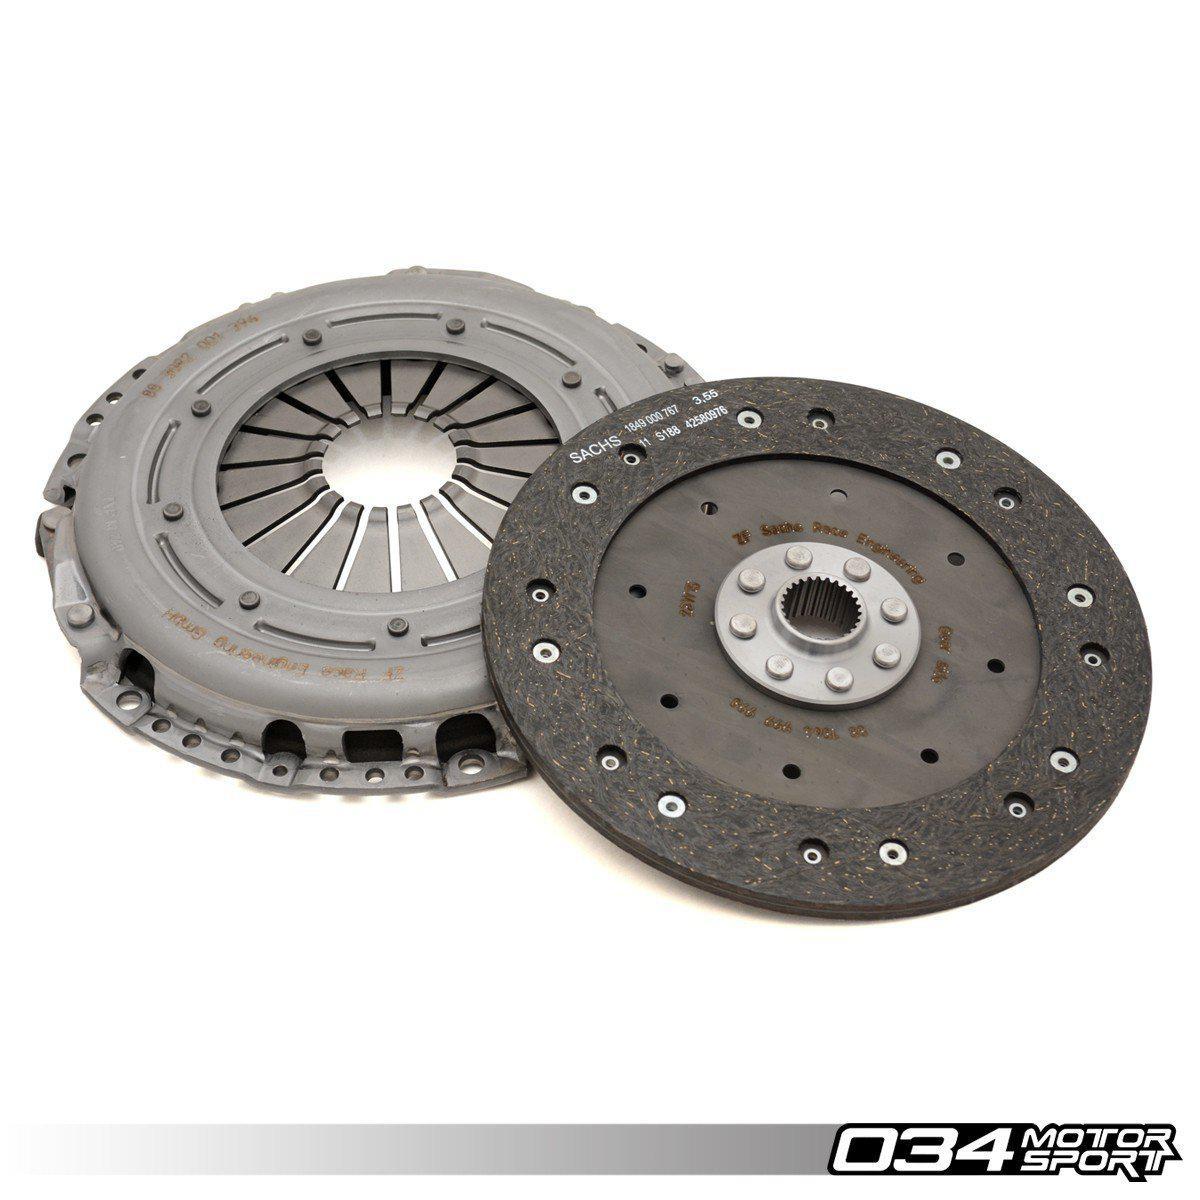 Sachs Performance Clutch Kit For B7 Audi RS4 4.2l Fsi-A Little Tuning Co